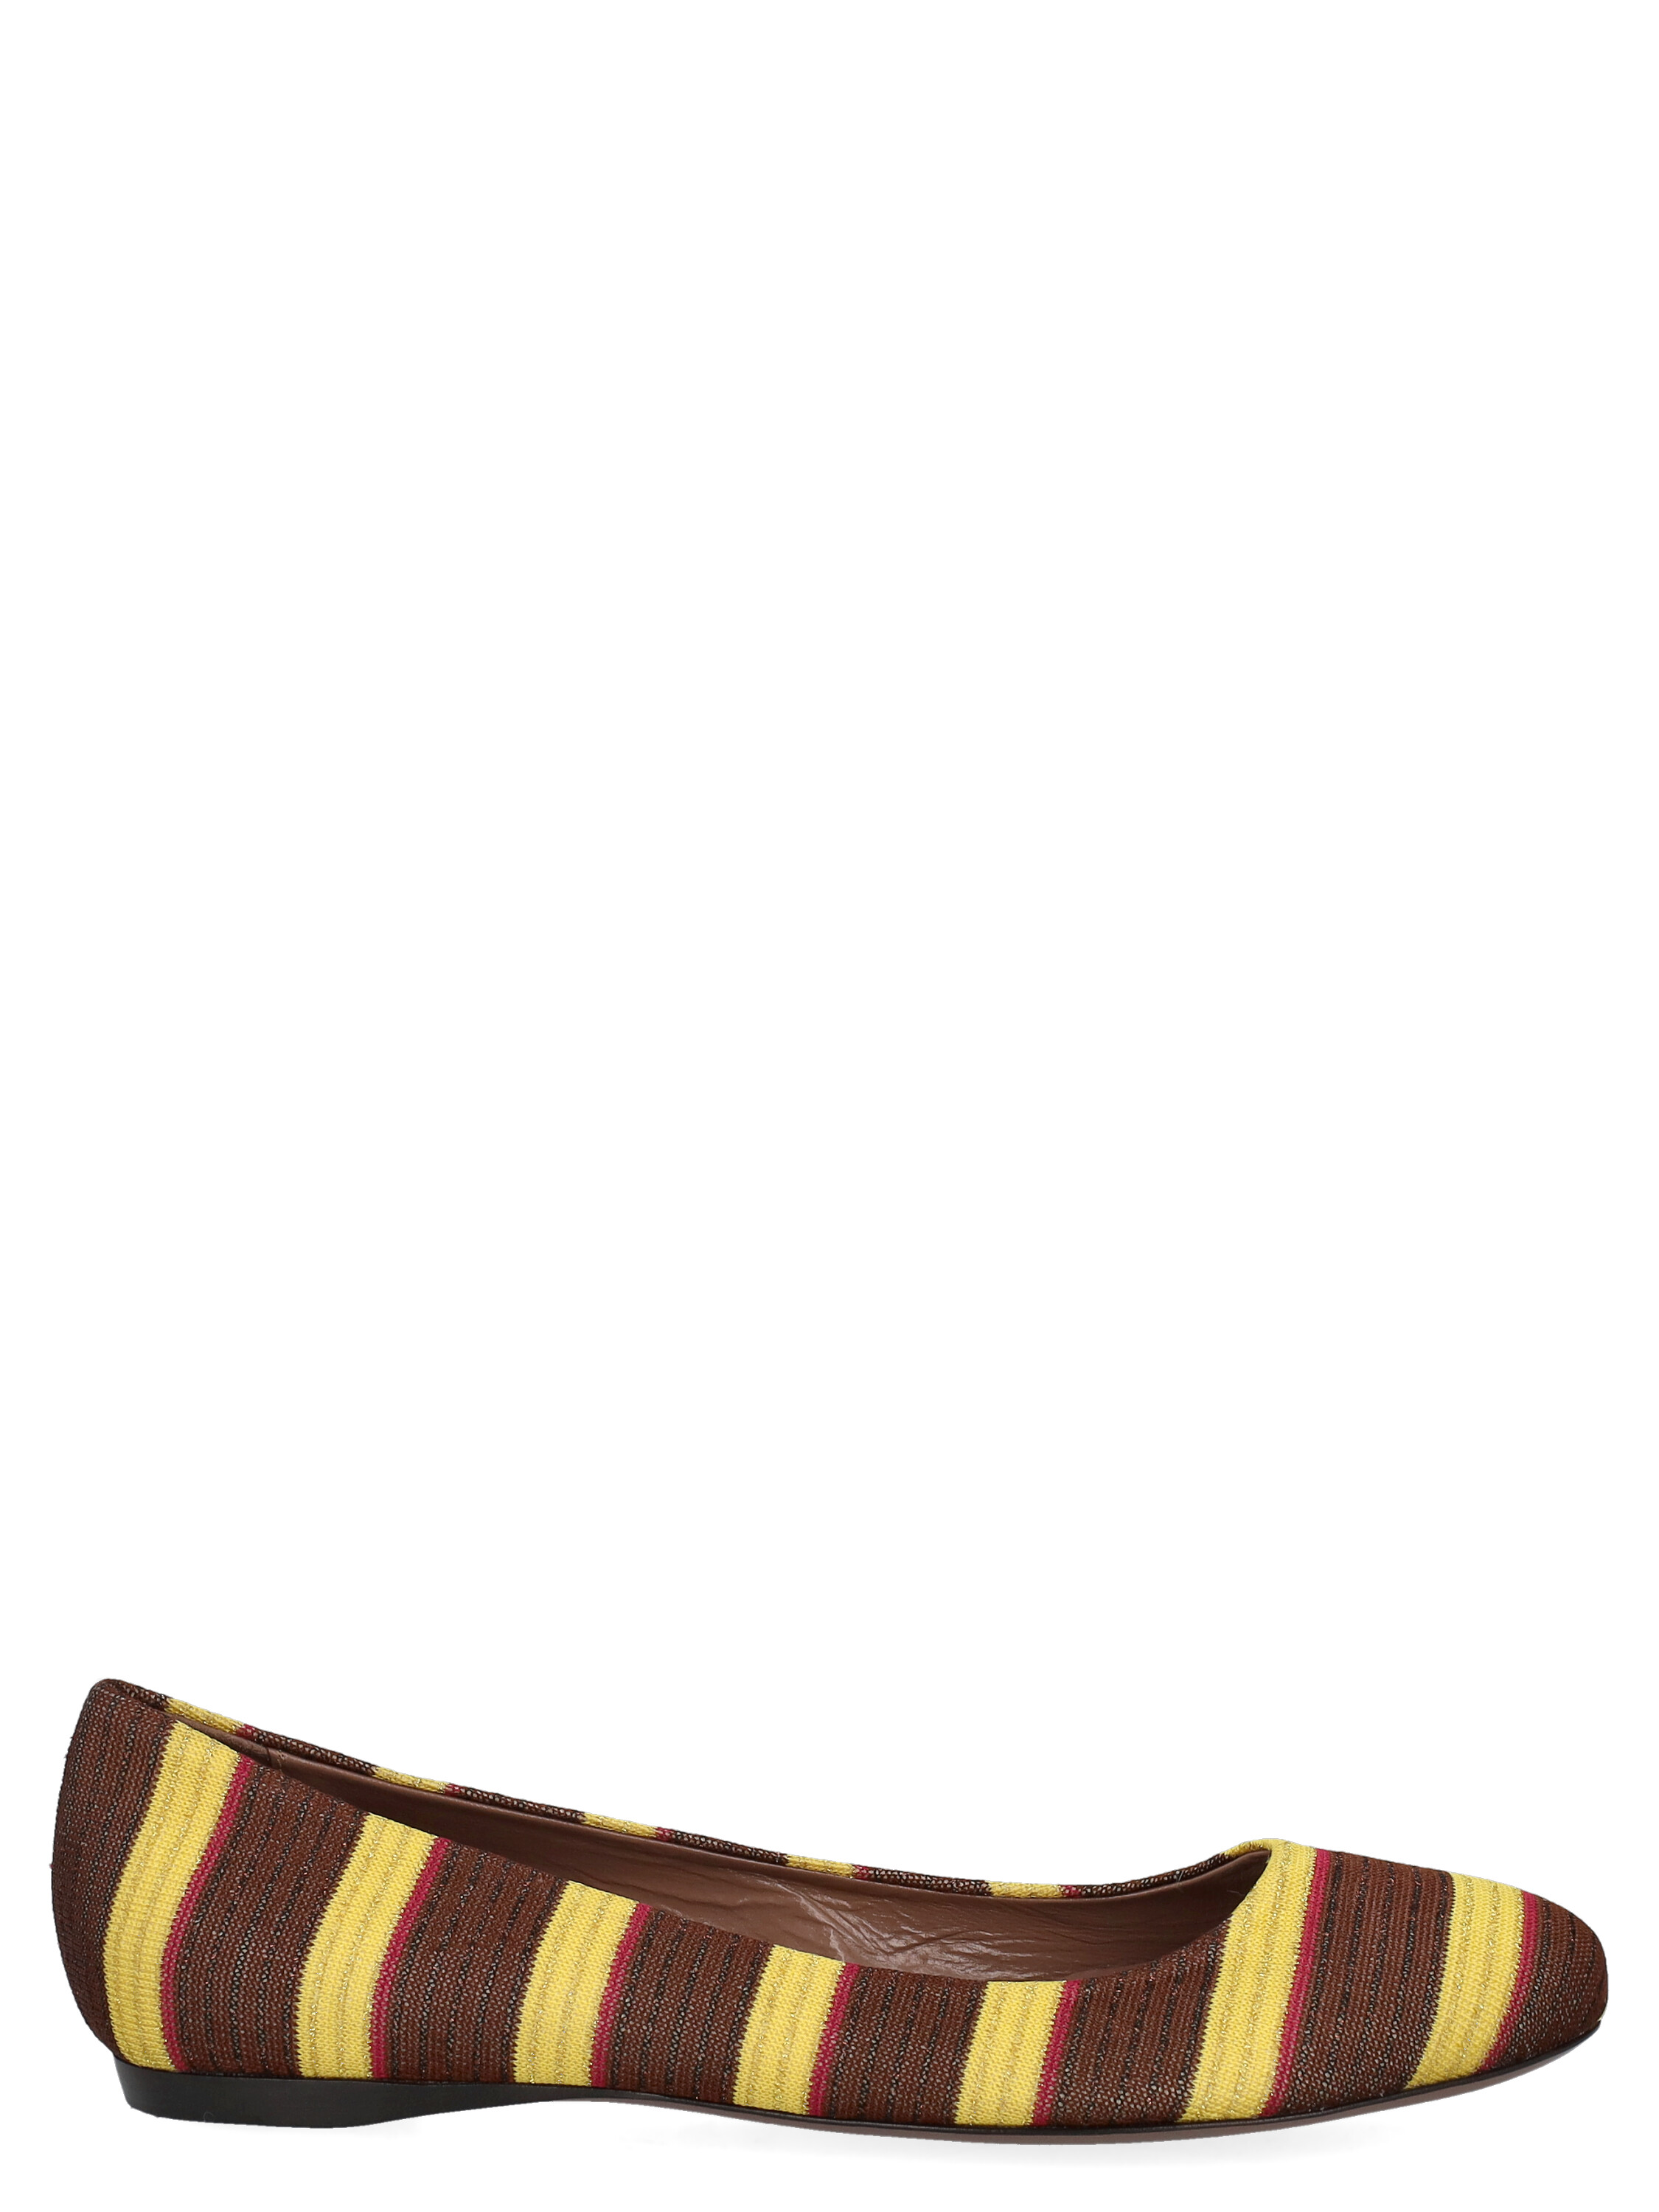 Pre-owned Missoni Women's Ballet Flats -  - In Brown, Yellow It 39